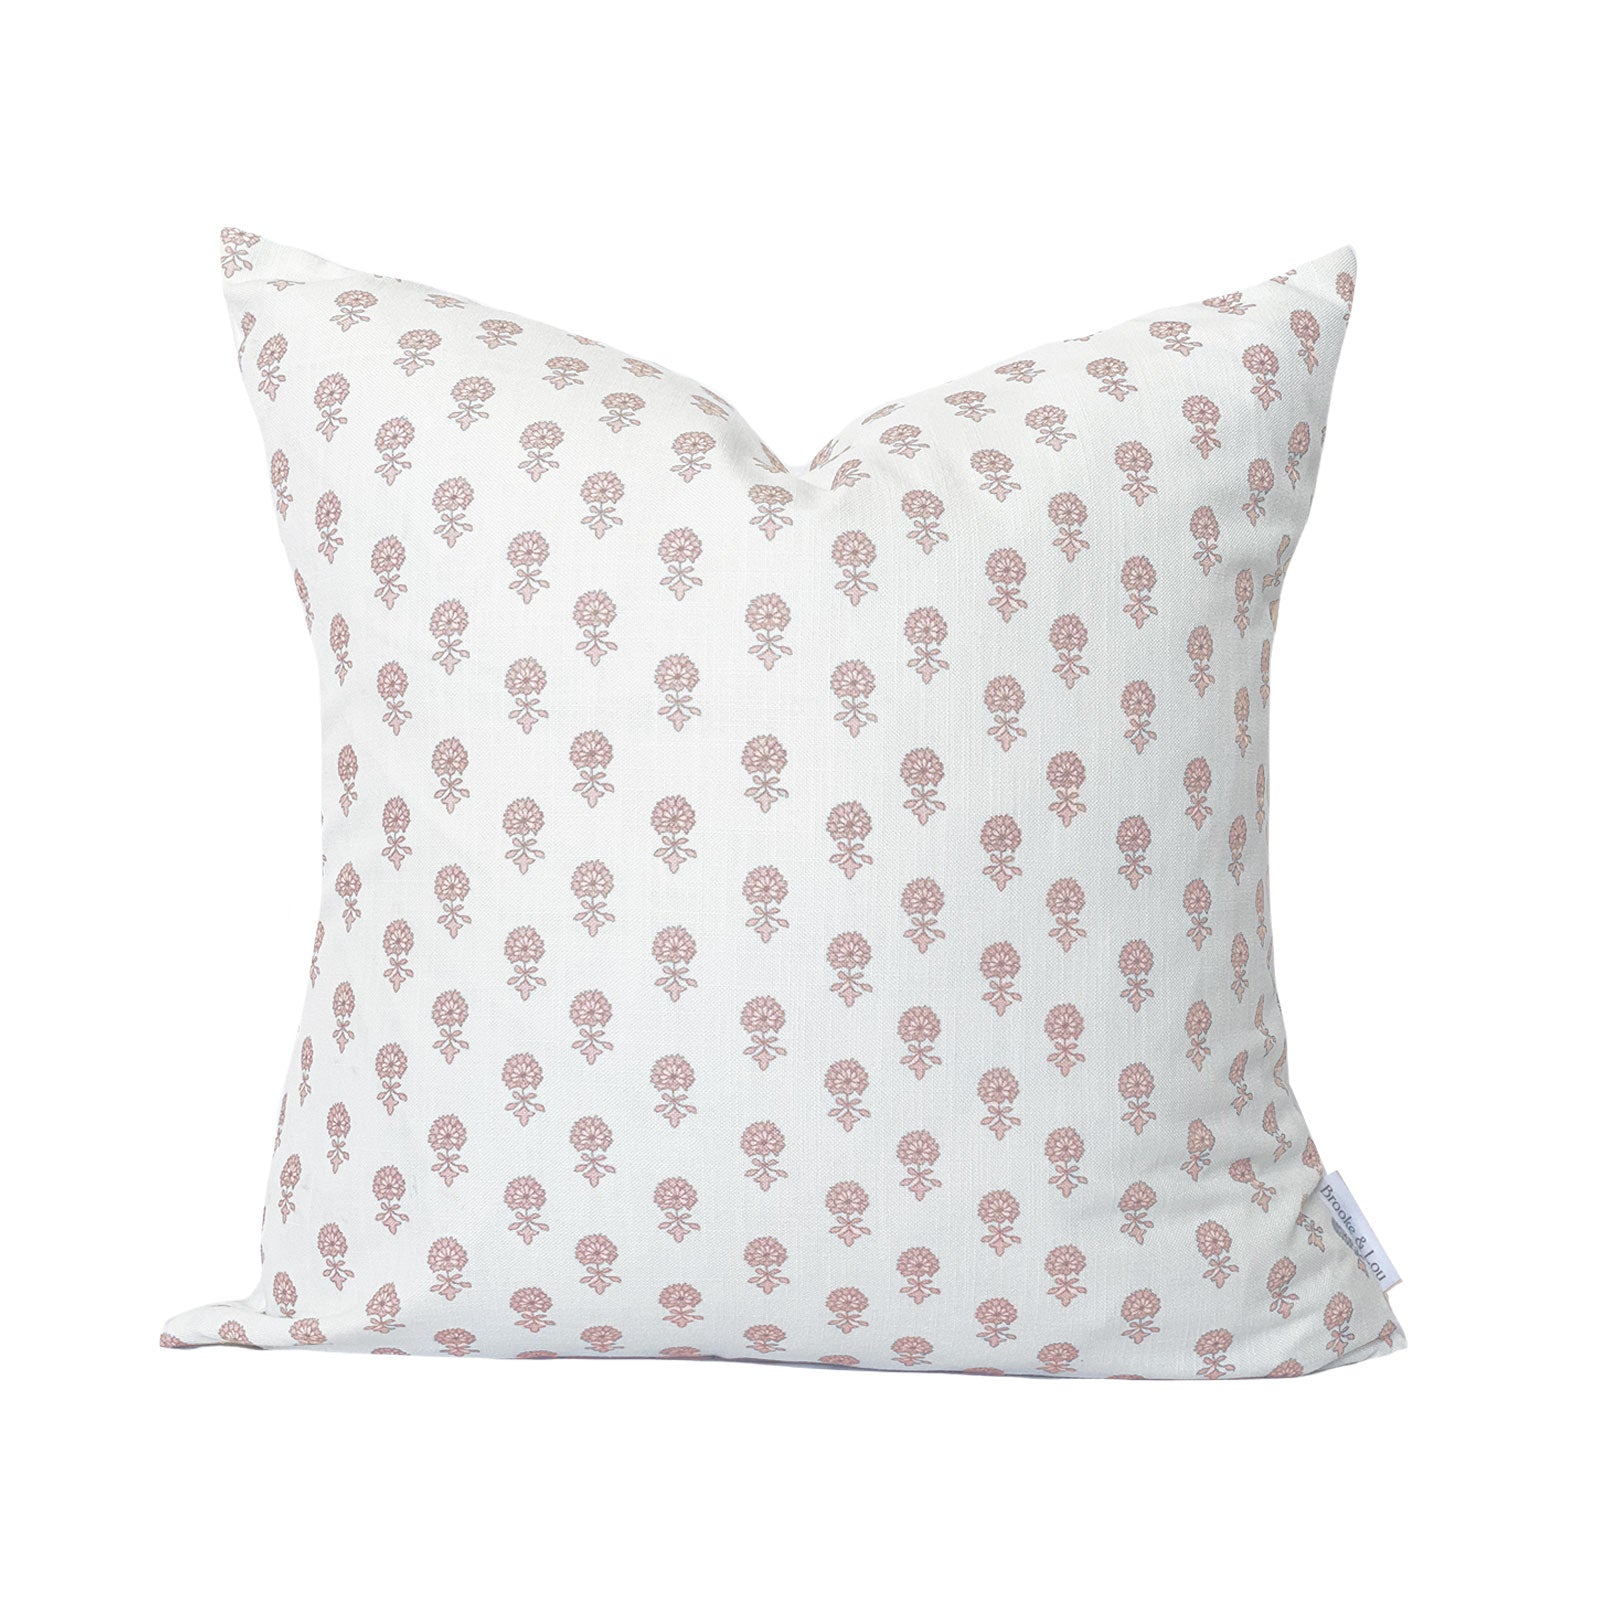 Lyla Pillow in Soft Coral